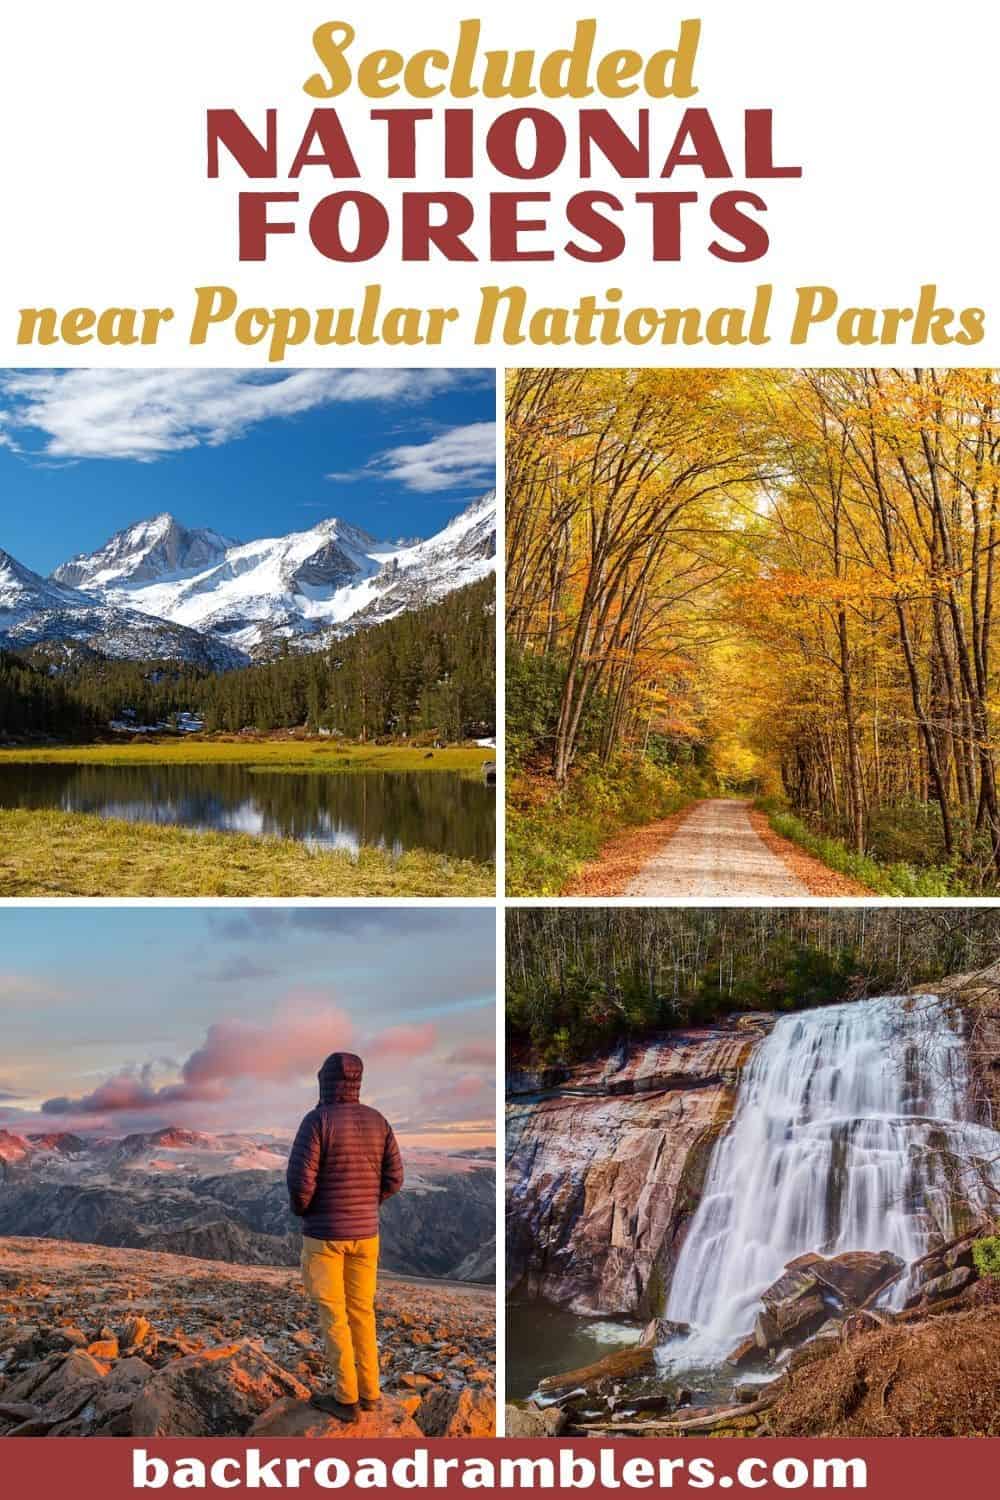 A collage of photos featuring beautiful and secluded national forests near national parks.